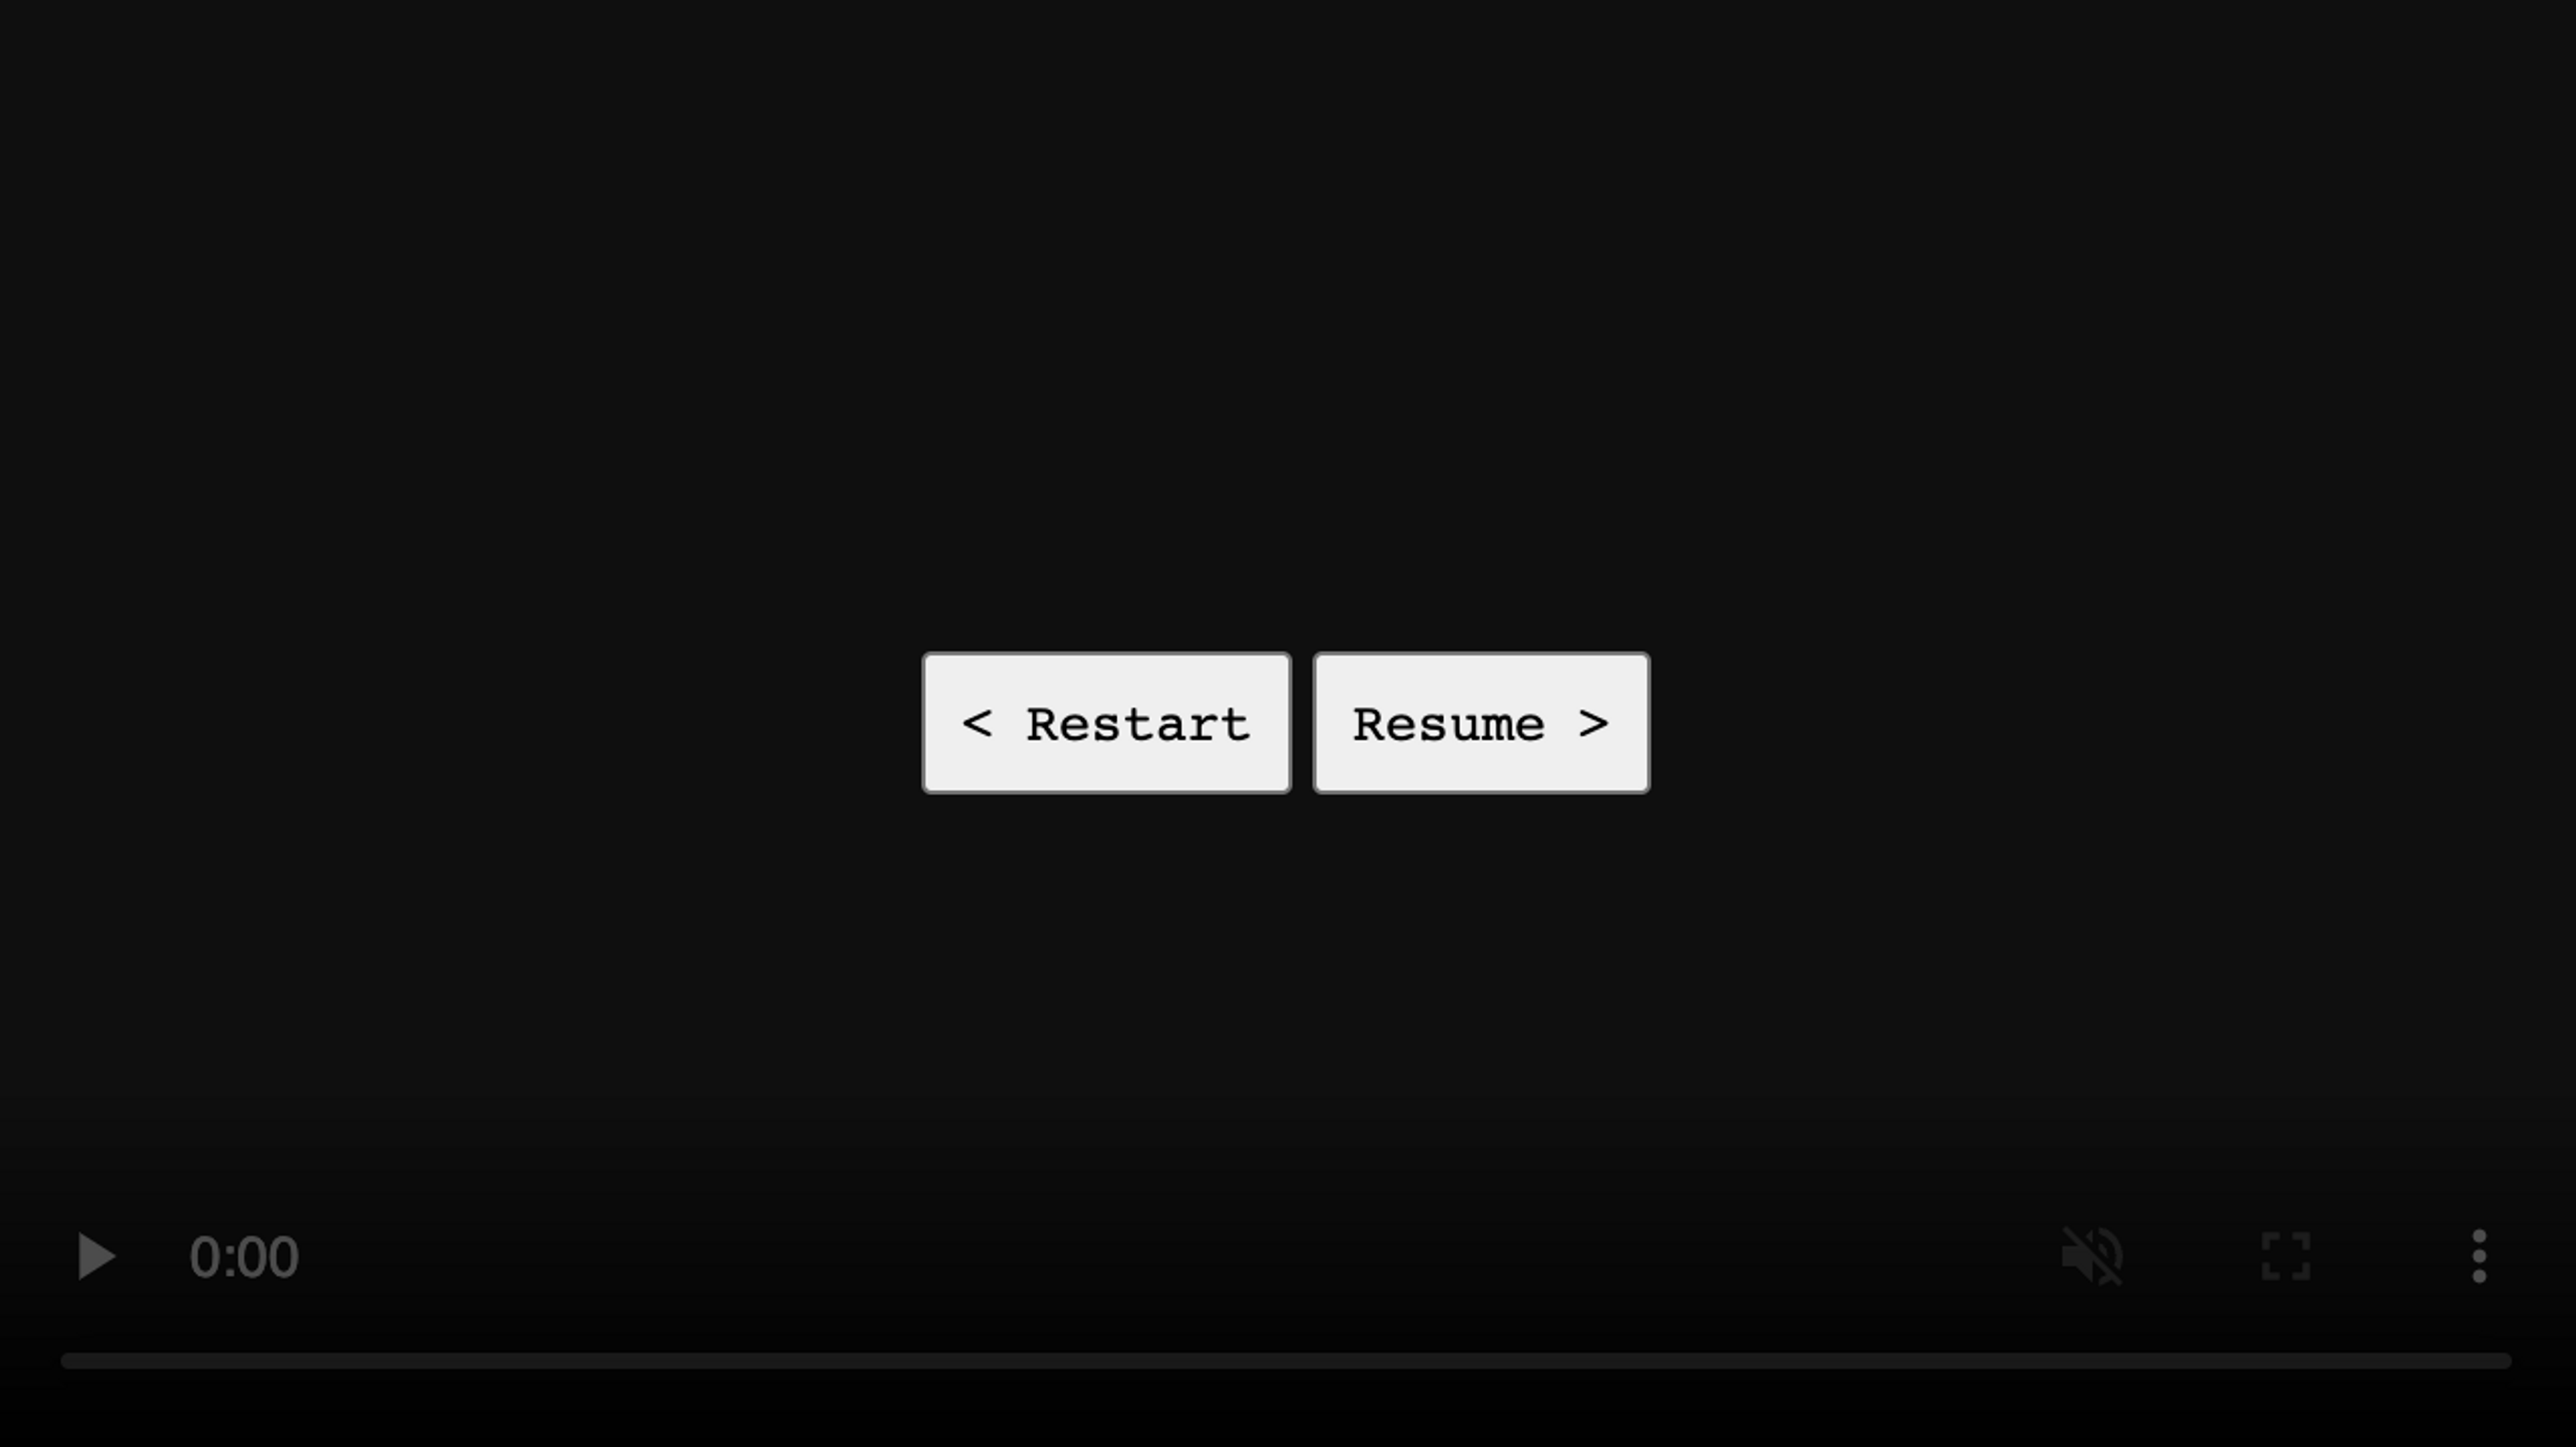 A screenshot of the custom WebComponent. There are two buttons visible, one of them labeled "Restart," and the other is labeled "Resume."